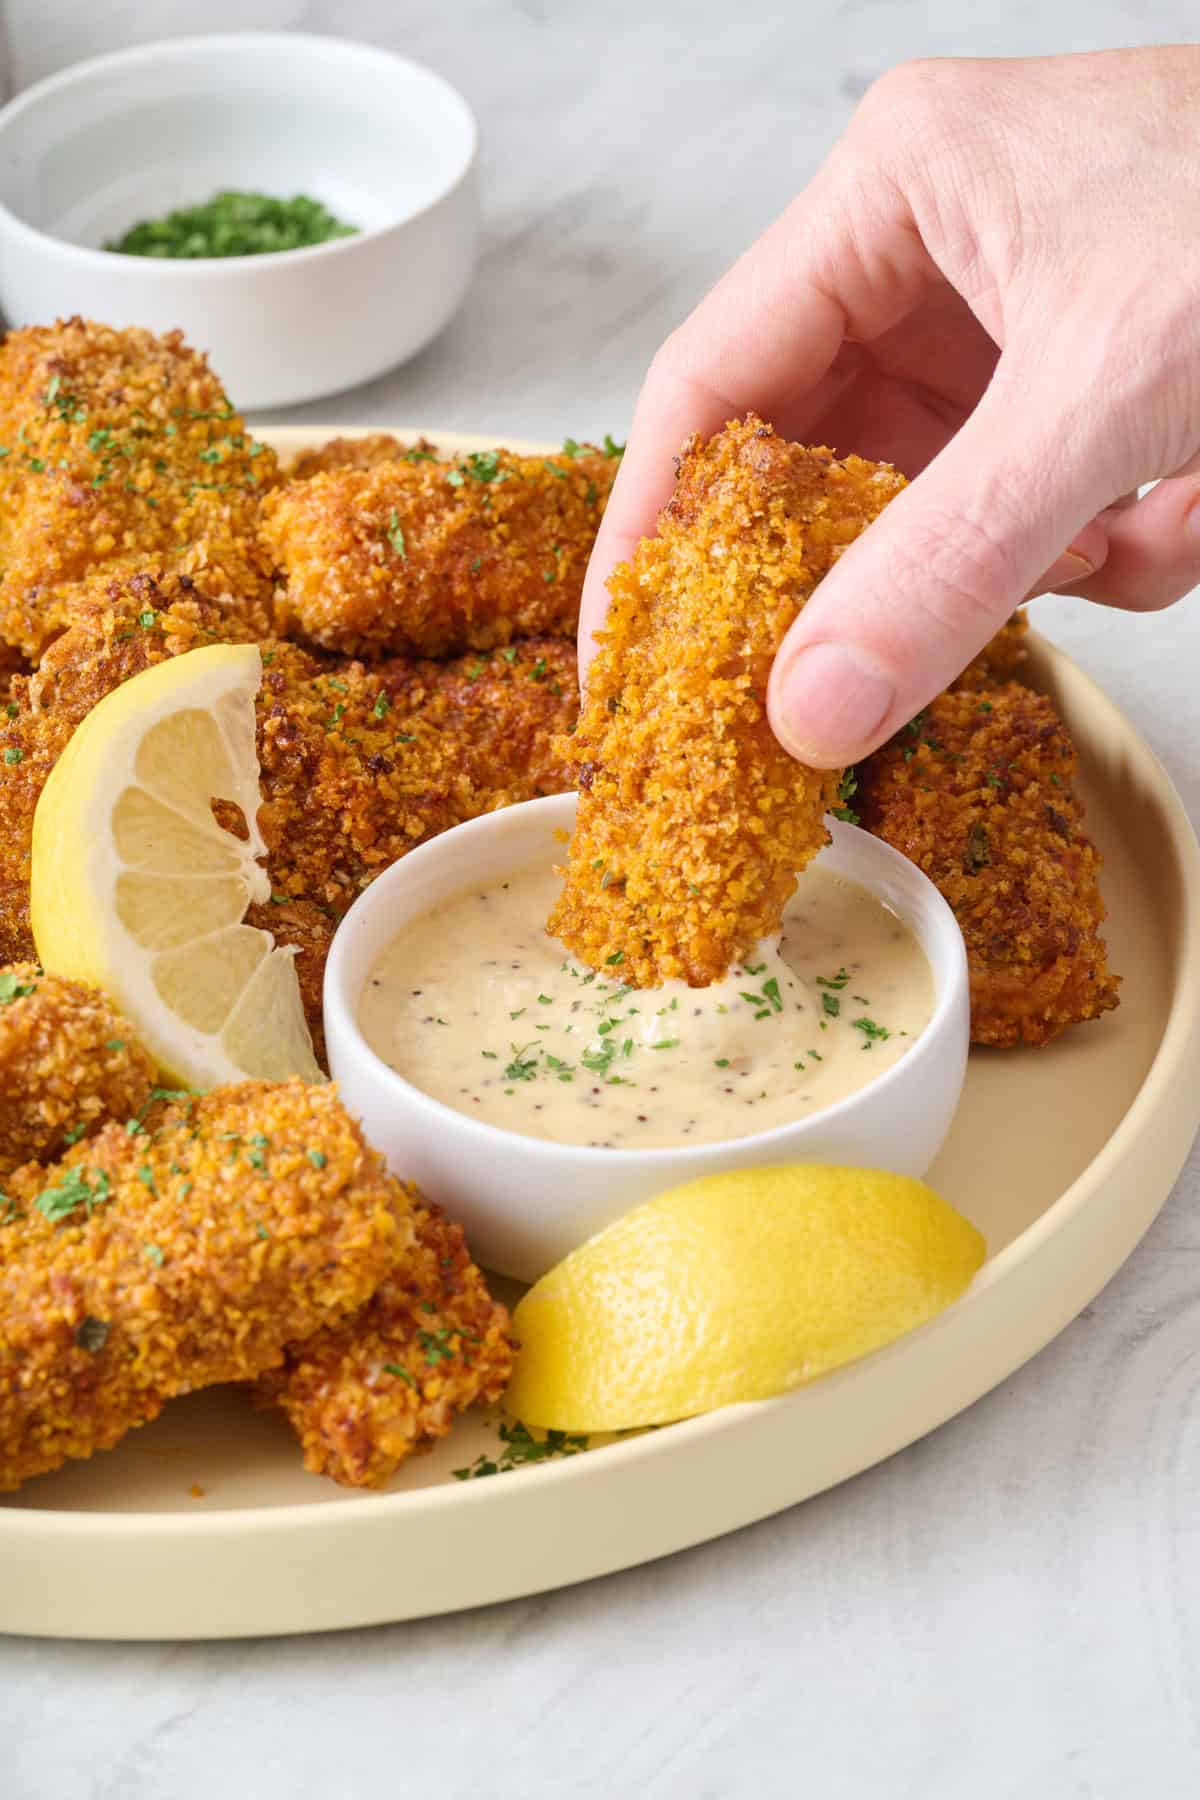 Hand dipping a salmon fish stick into a creamy sauce.